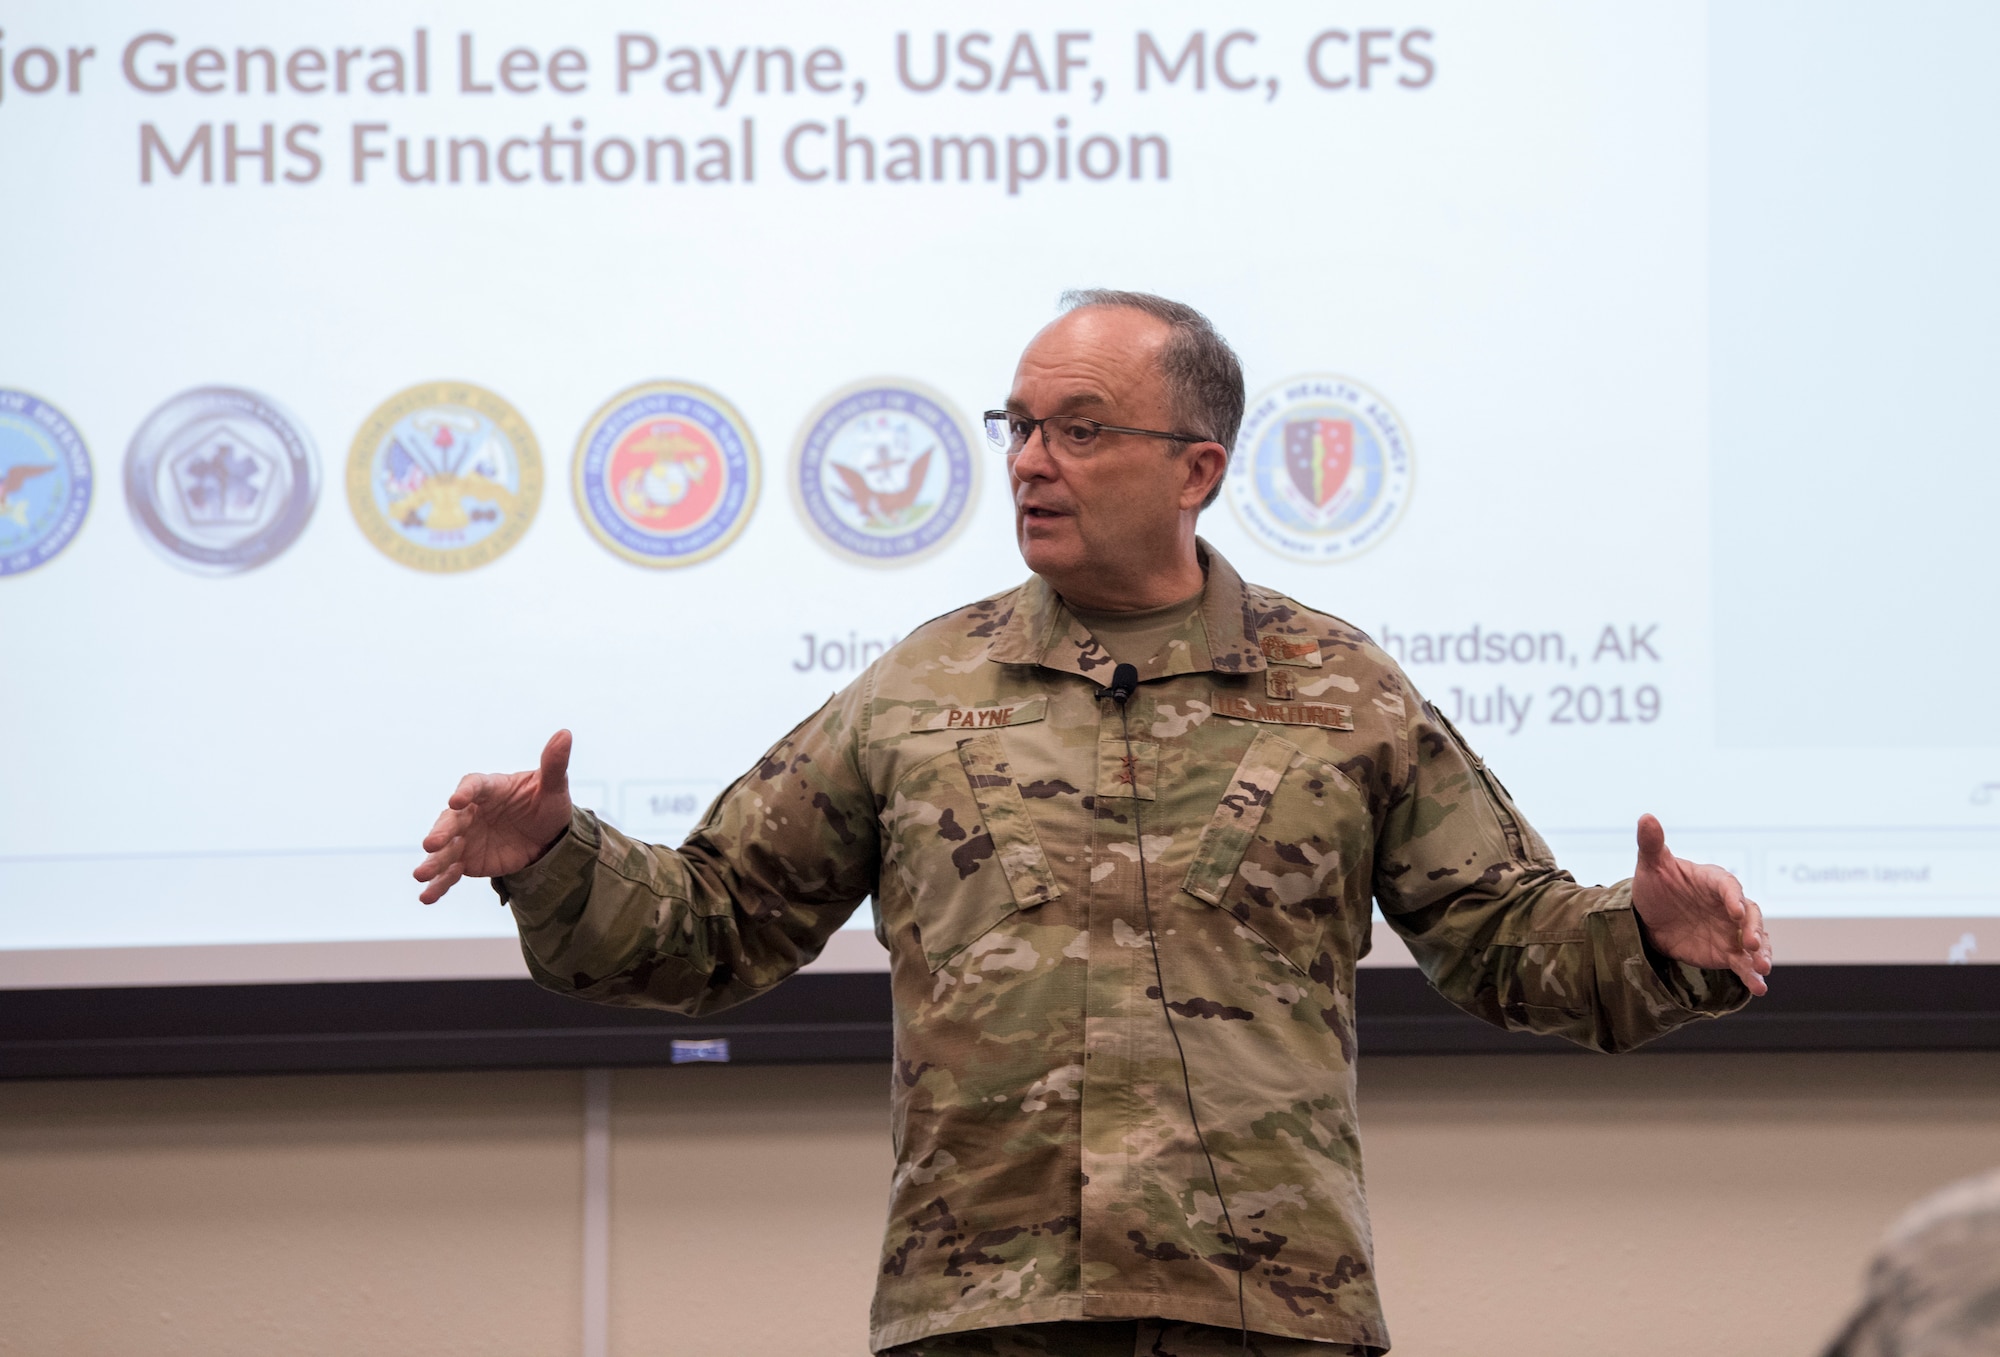 U.S. Air Force Maj. Gen. Lee E. Payne, Defense Health Agency Assistant Director for Combat Support, and Military Health System Electronic Health Record Functional Champion, briefs Joint Base Elmendorf-Richardson’s medical personnel during his visit at JBER, Alaska, July 9, 2019. Payne discussed upcoming changes to MHS and what that means for patients and providers.